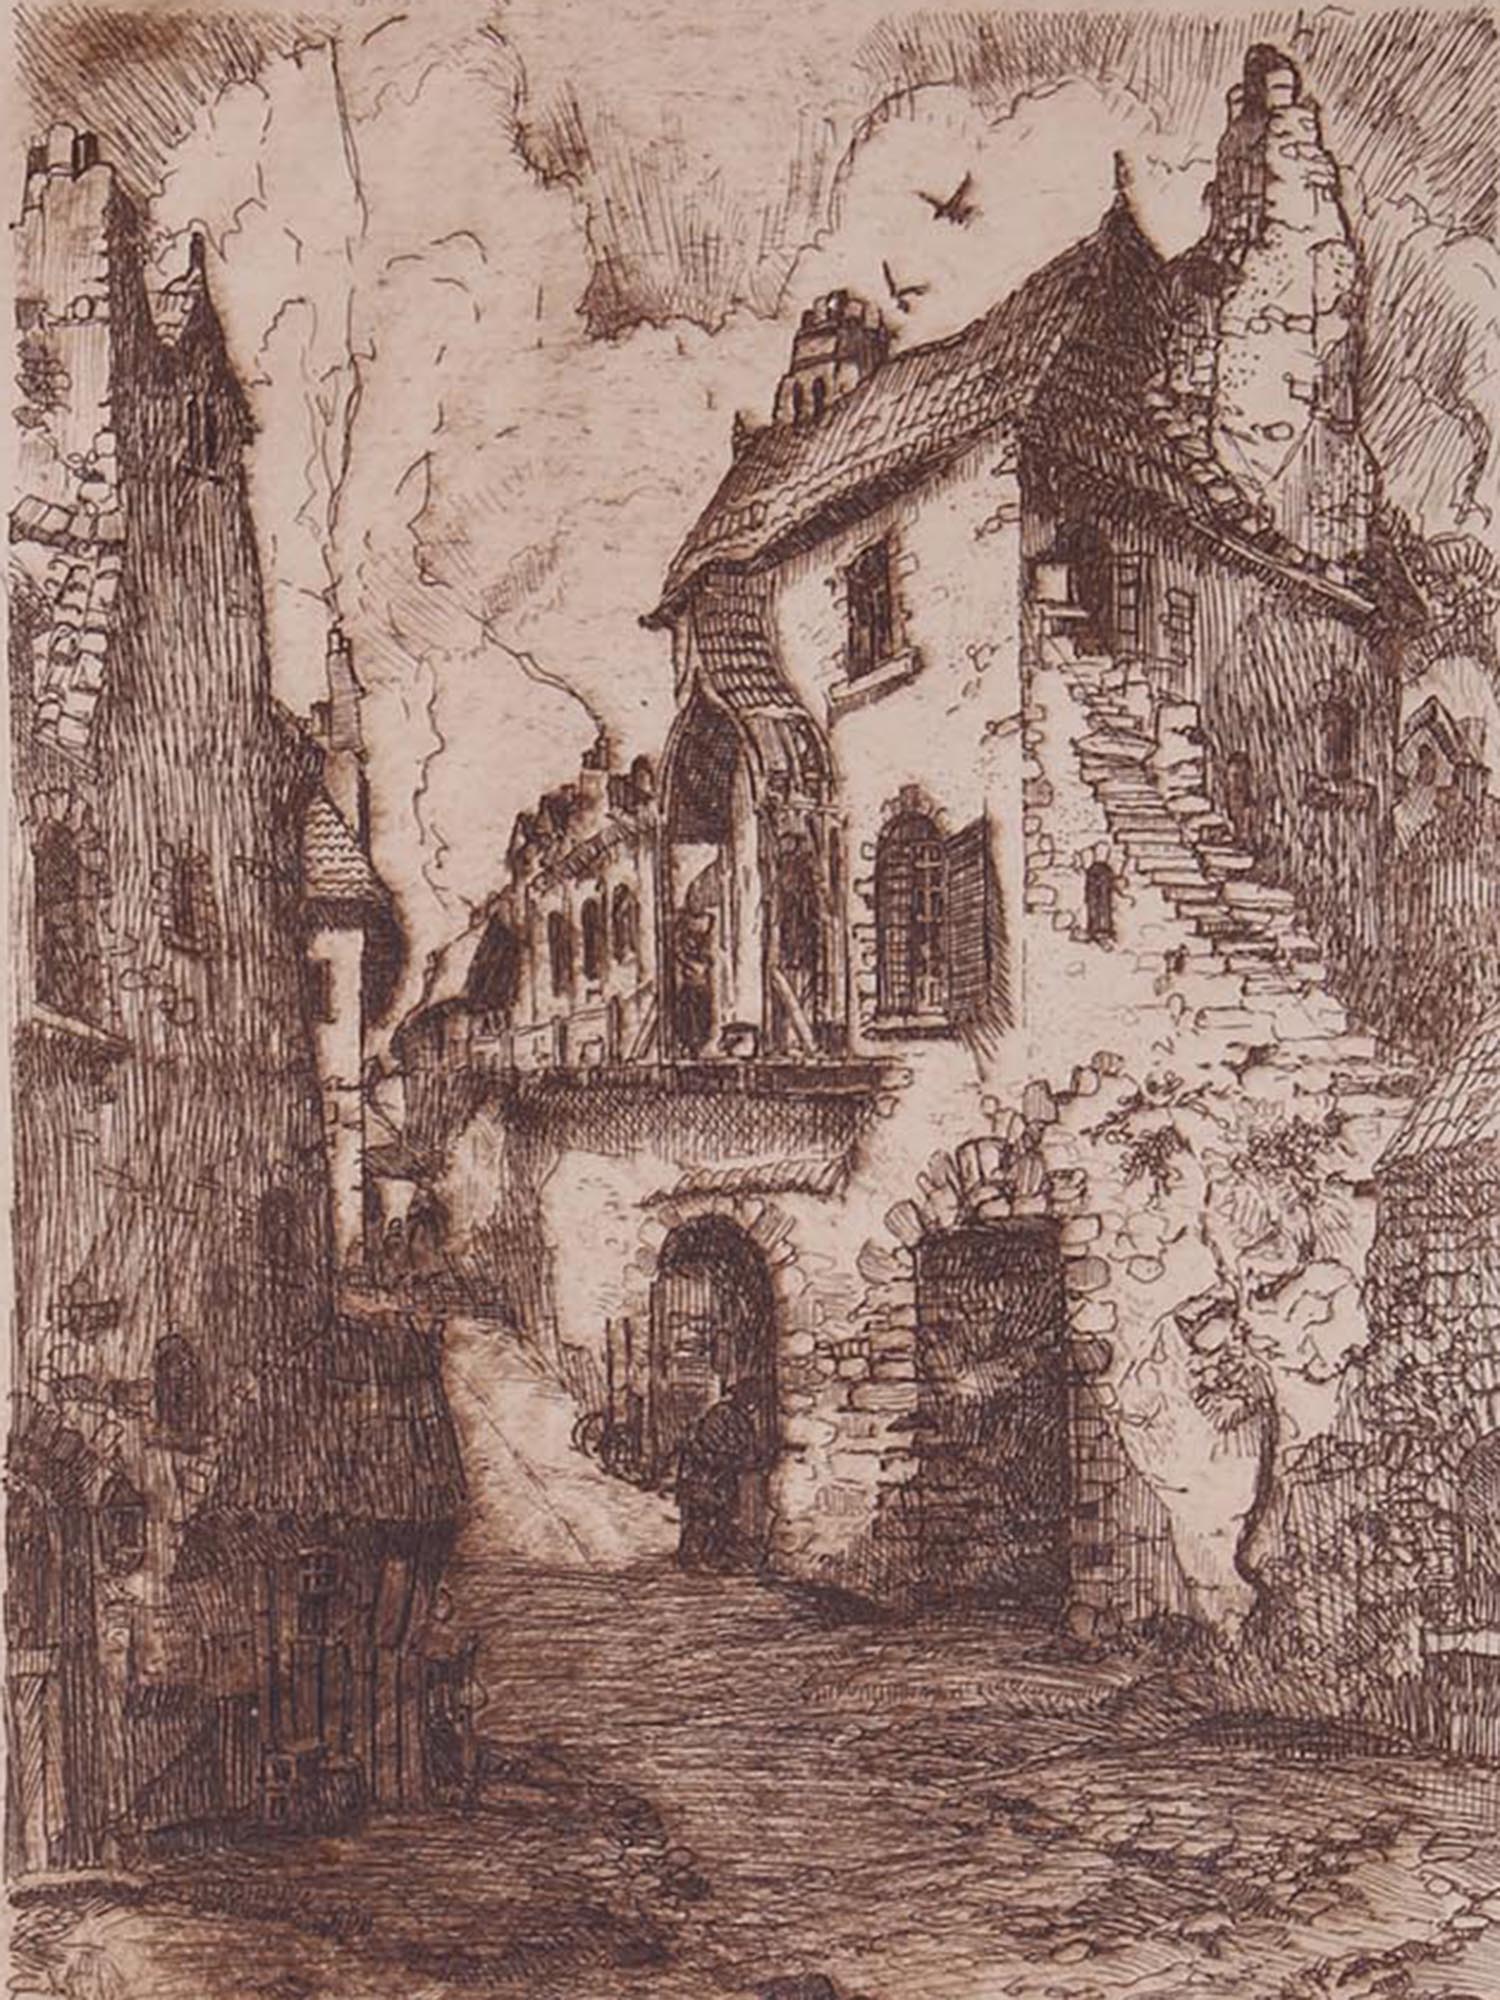 AMERICAN ETCHING OF OLD FRANCE BY EDWILL FISHER PIC-1